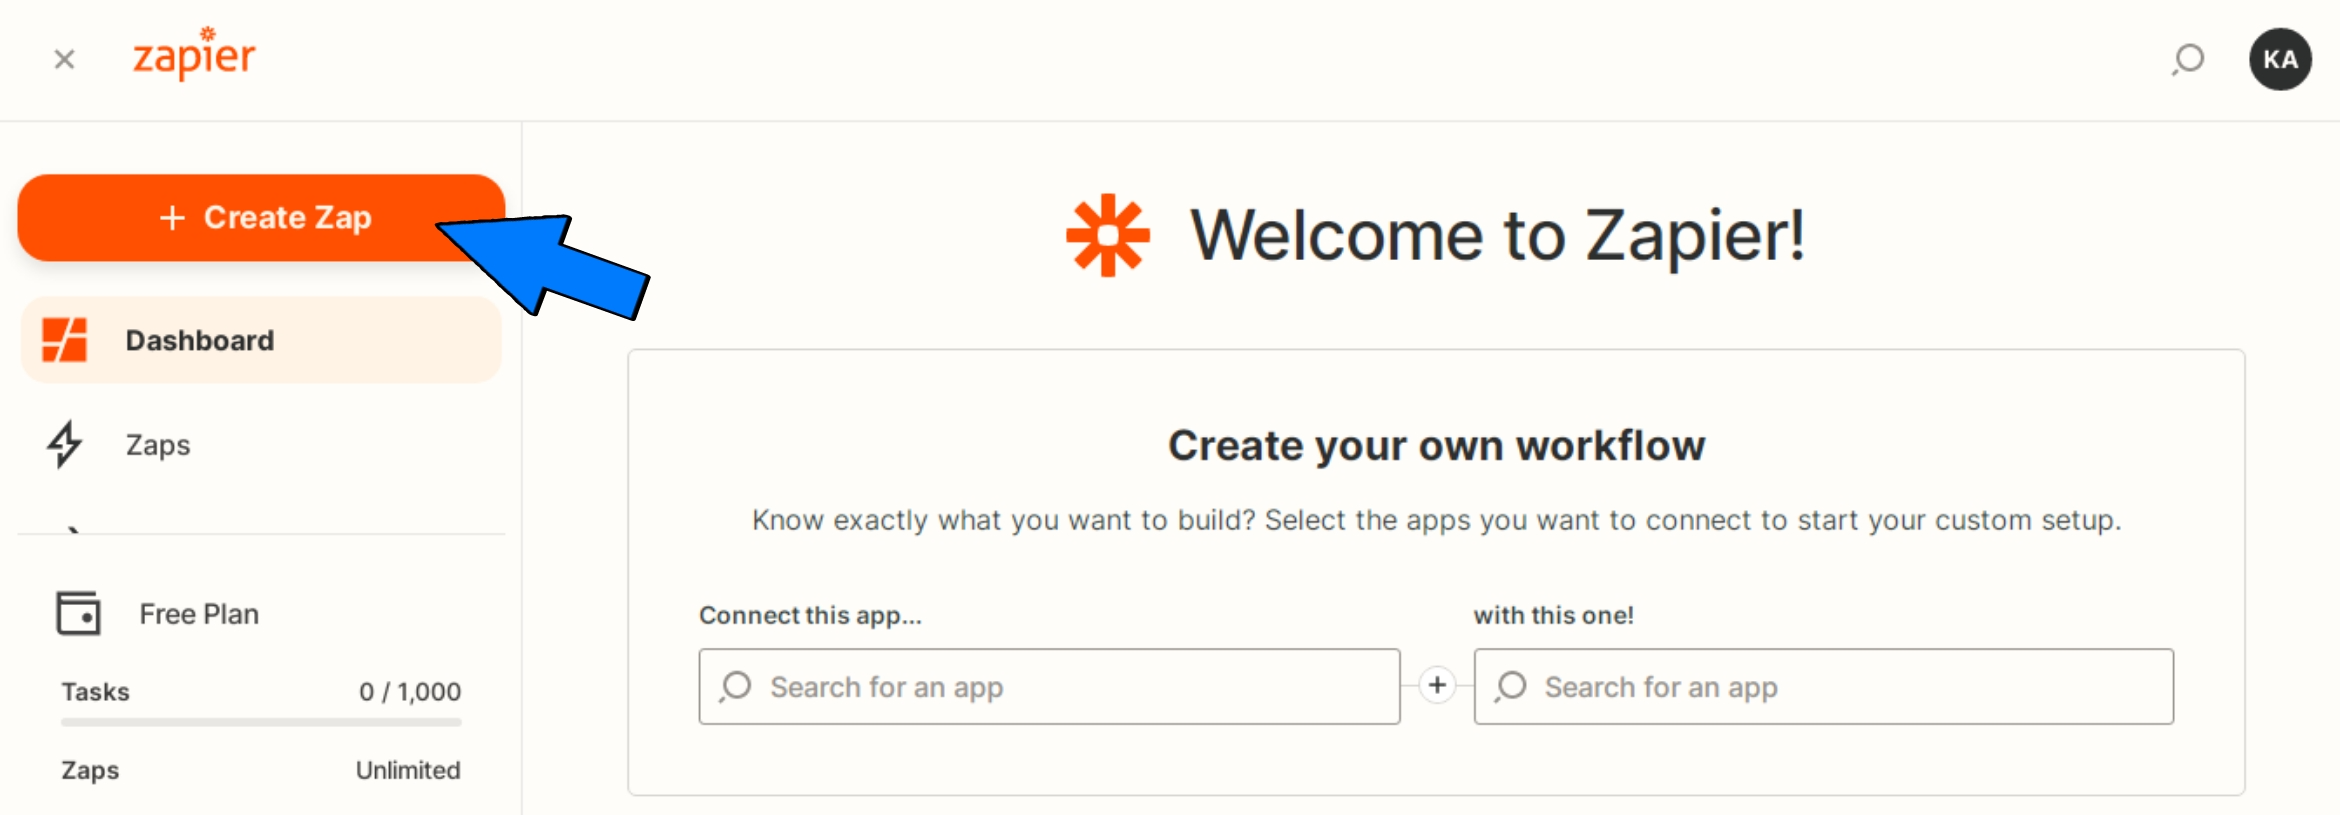 Google Forms & Ideolve integration with Zapier